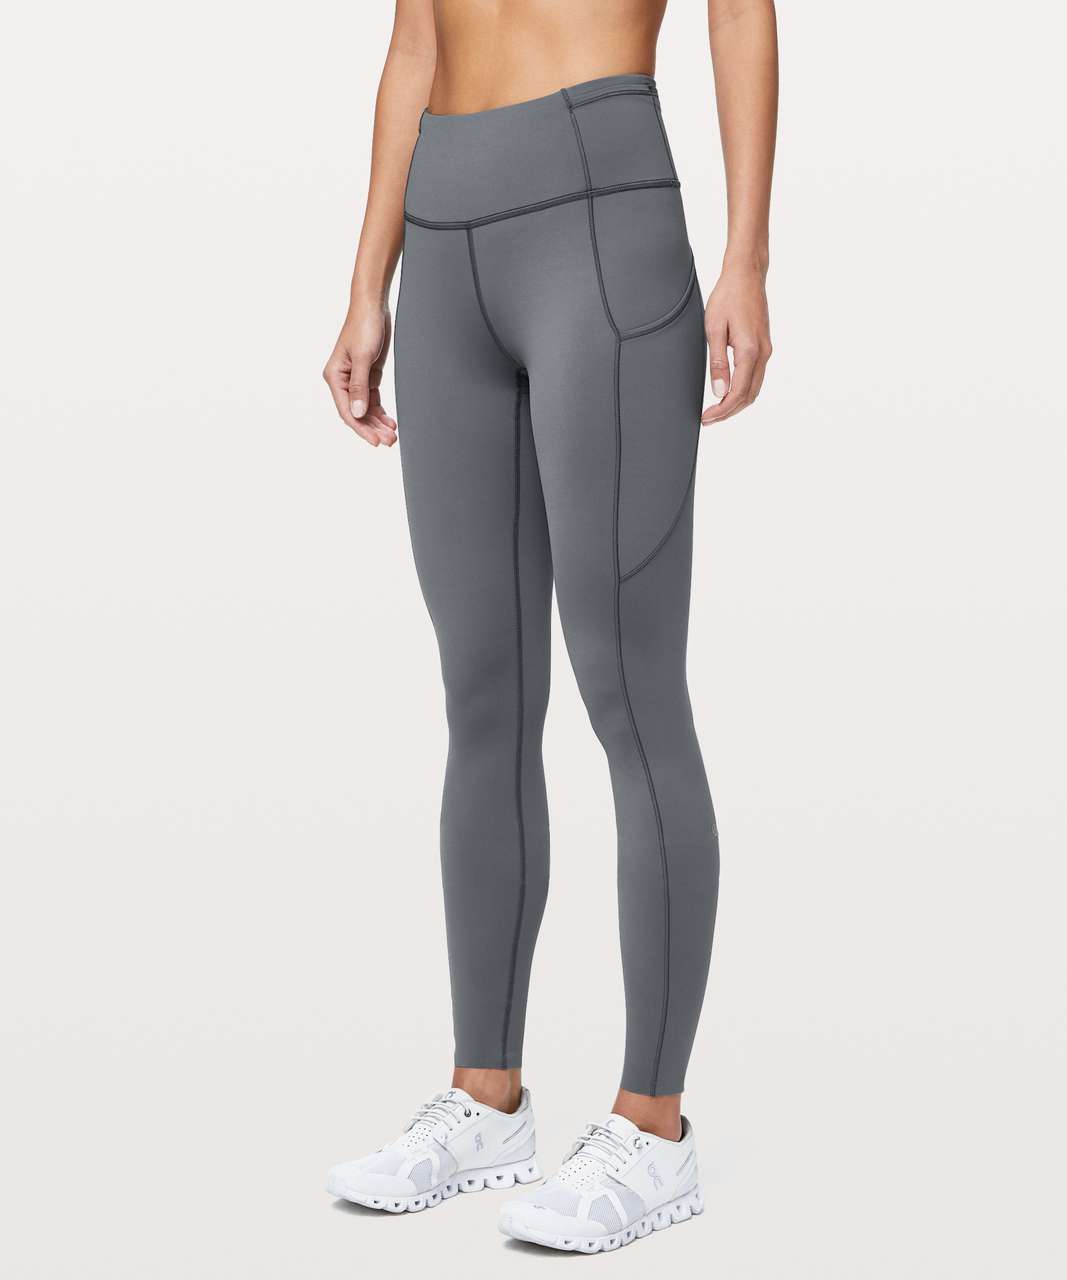 Lululemon Fast and Free Tight 31" *Non-Reflective - Steam Blue